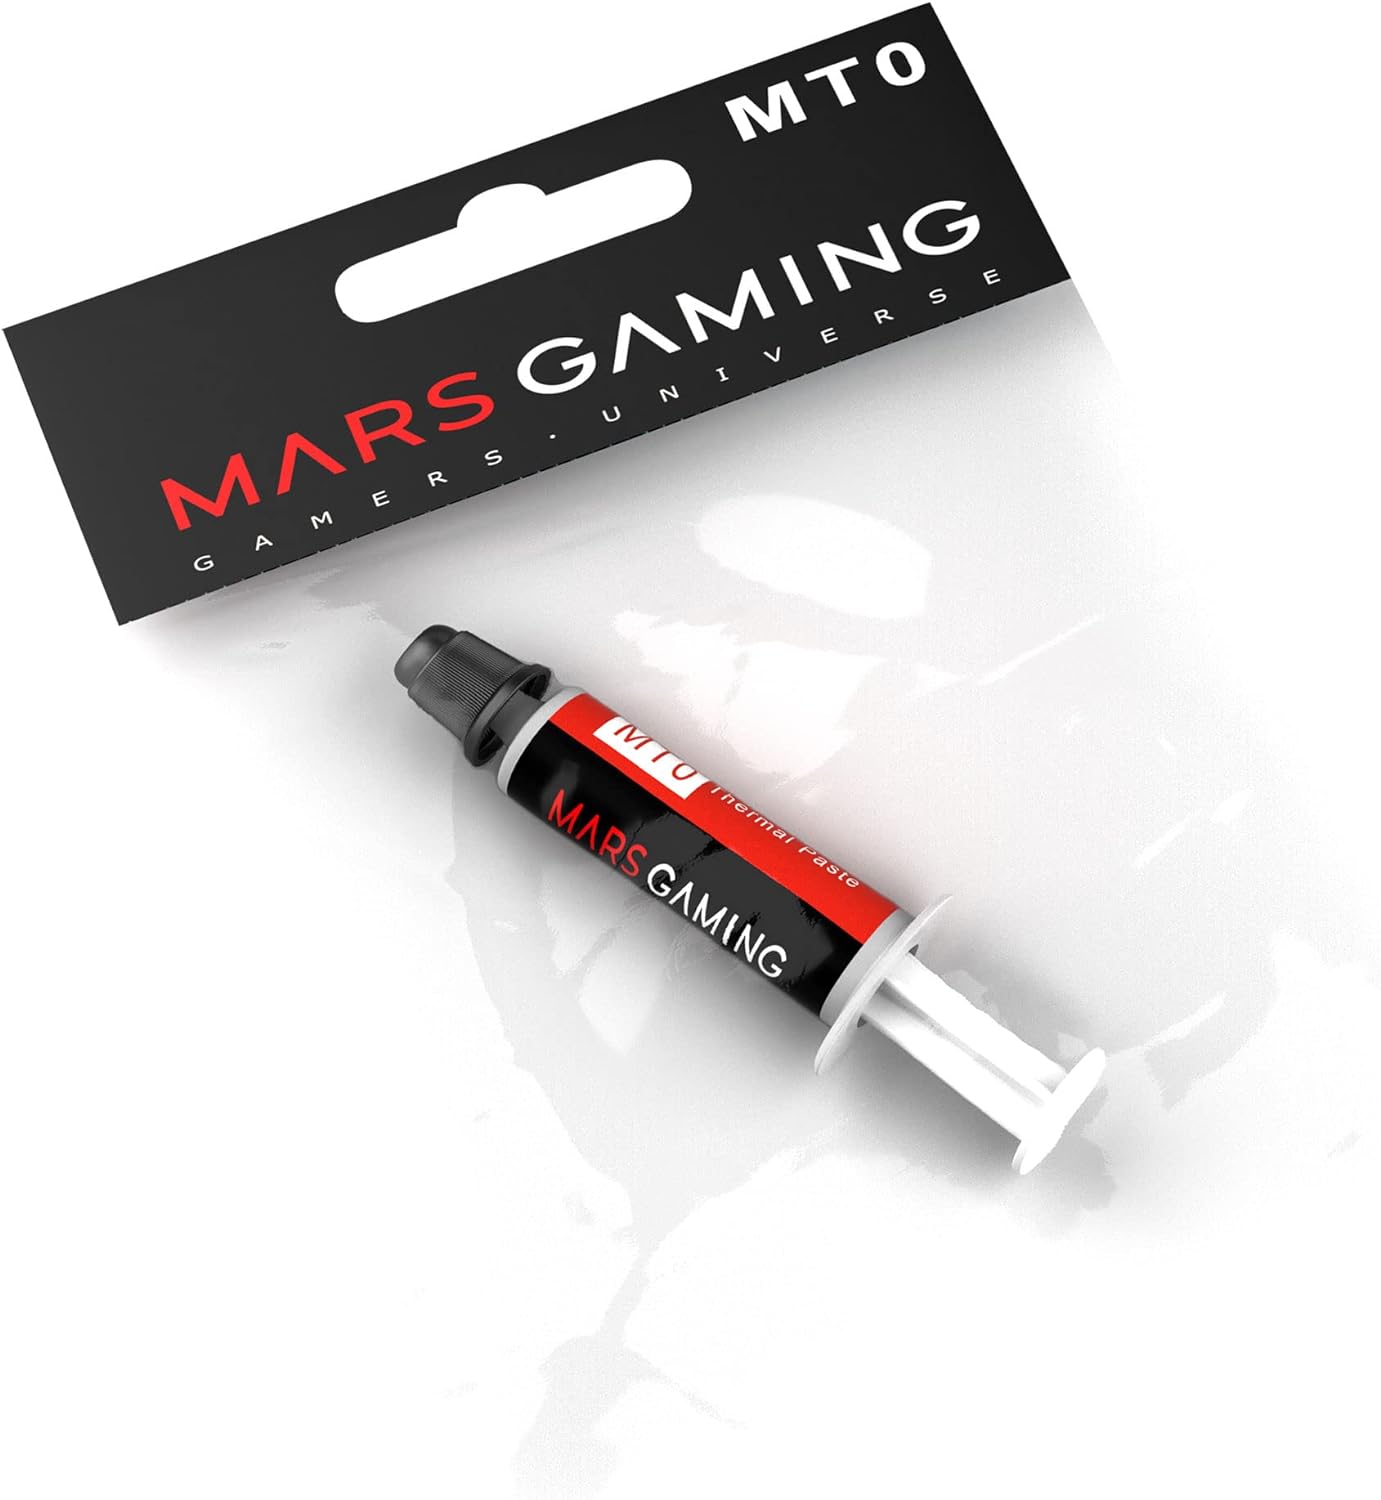 PATE THERMIQUE MARS GAMING MT0 6W